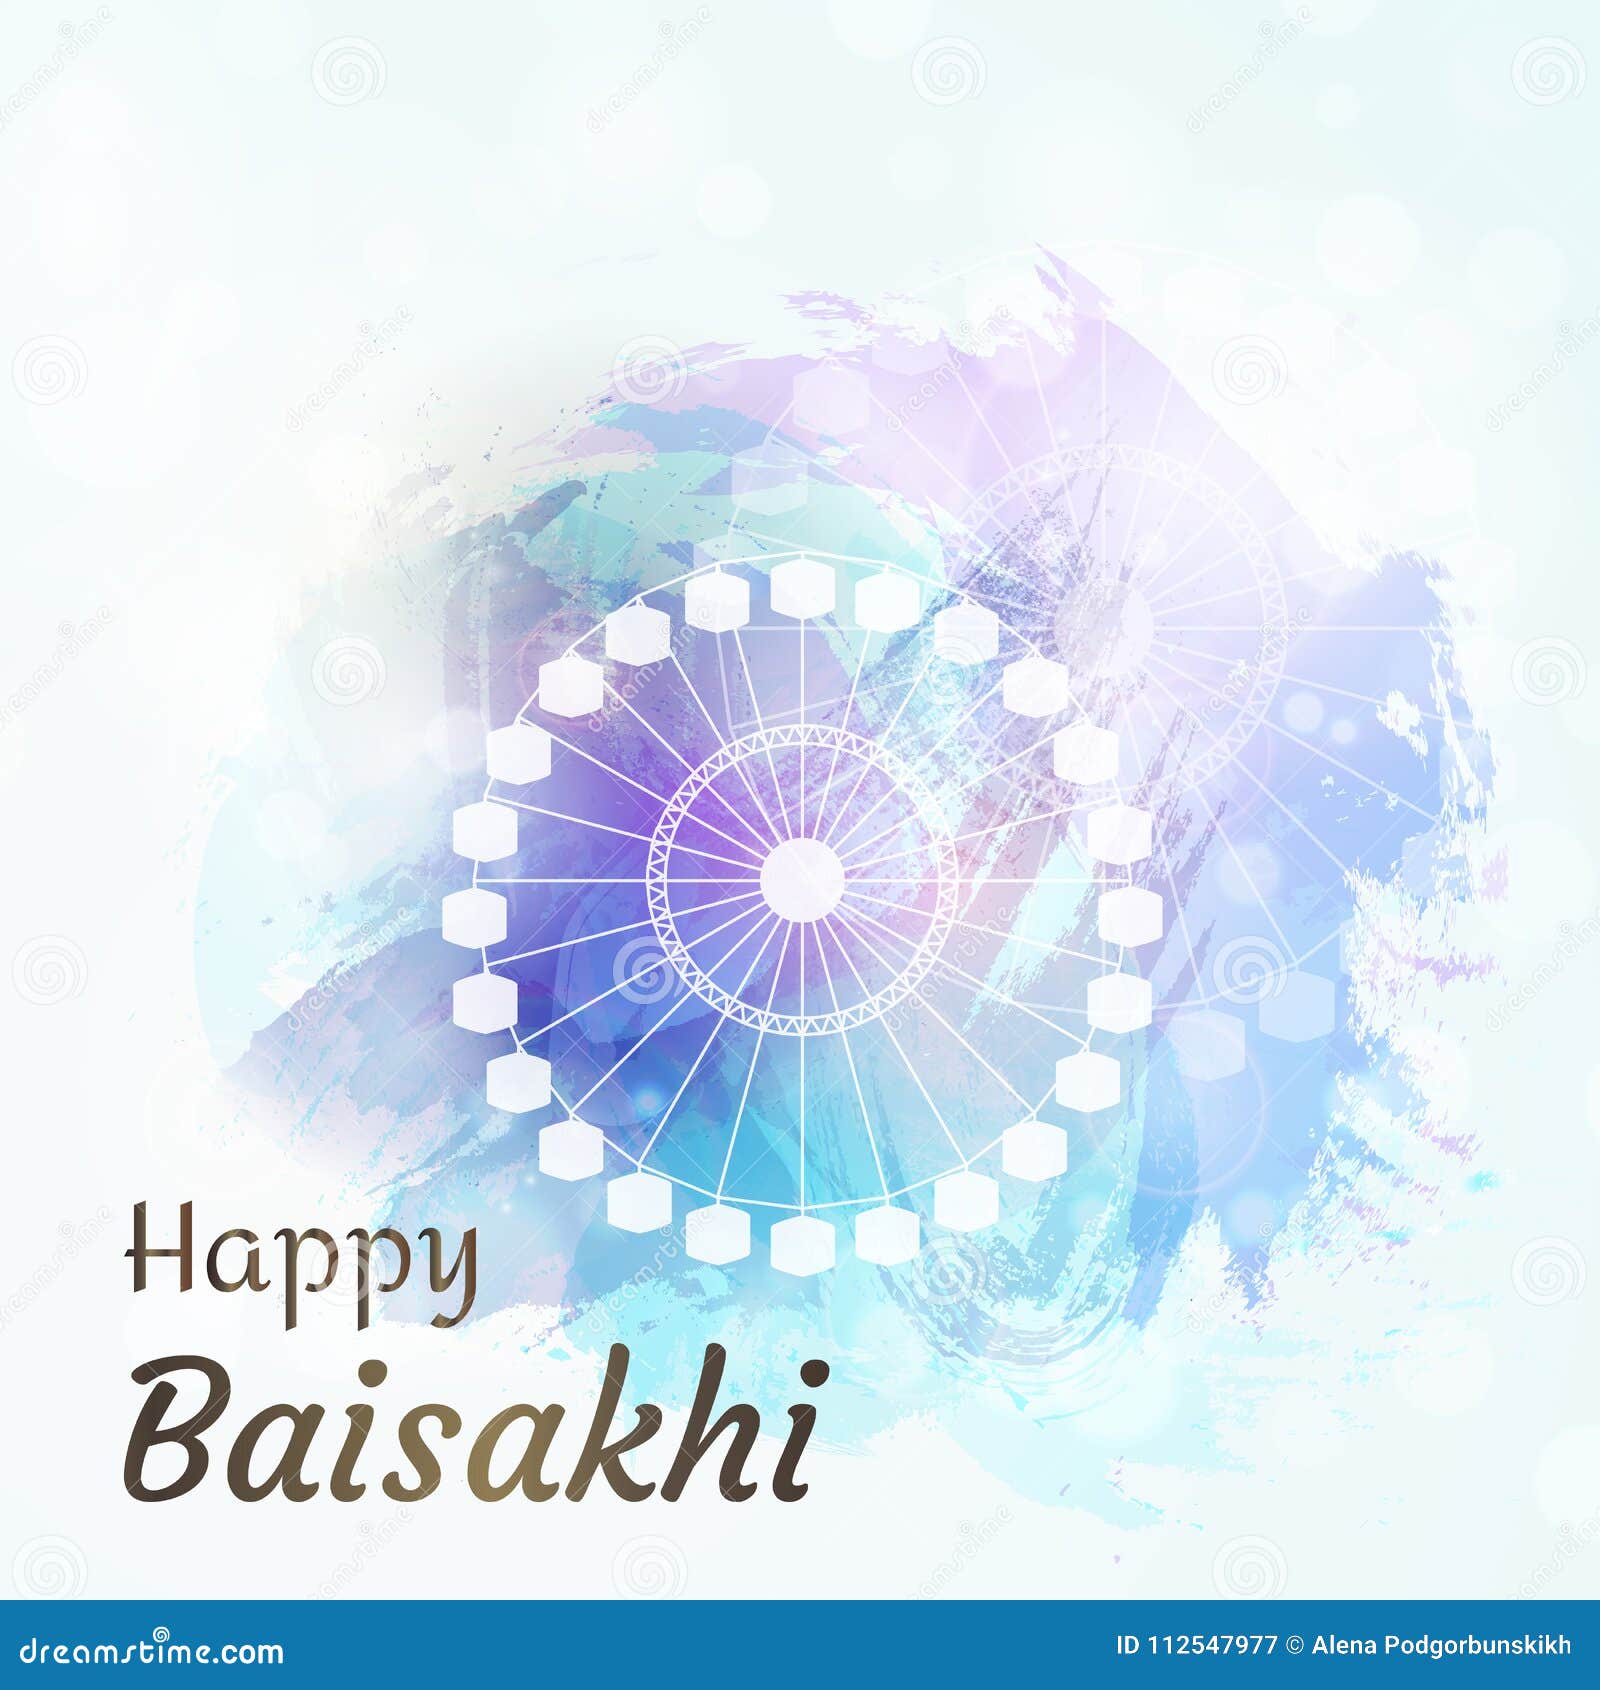 How to Draw Baisakhi Greeting Card and Poster